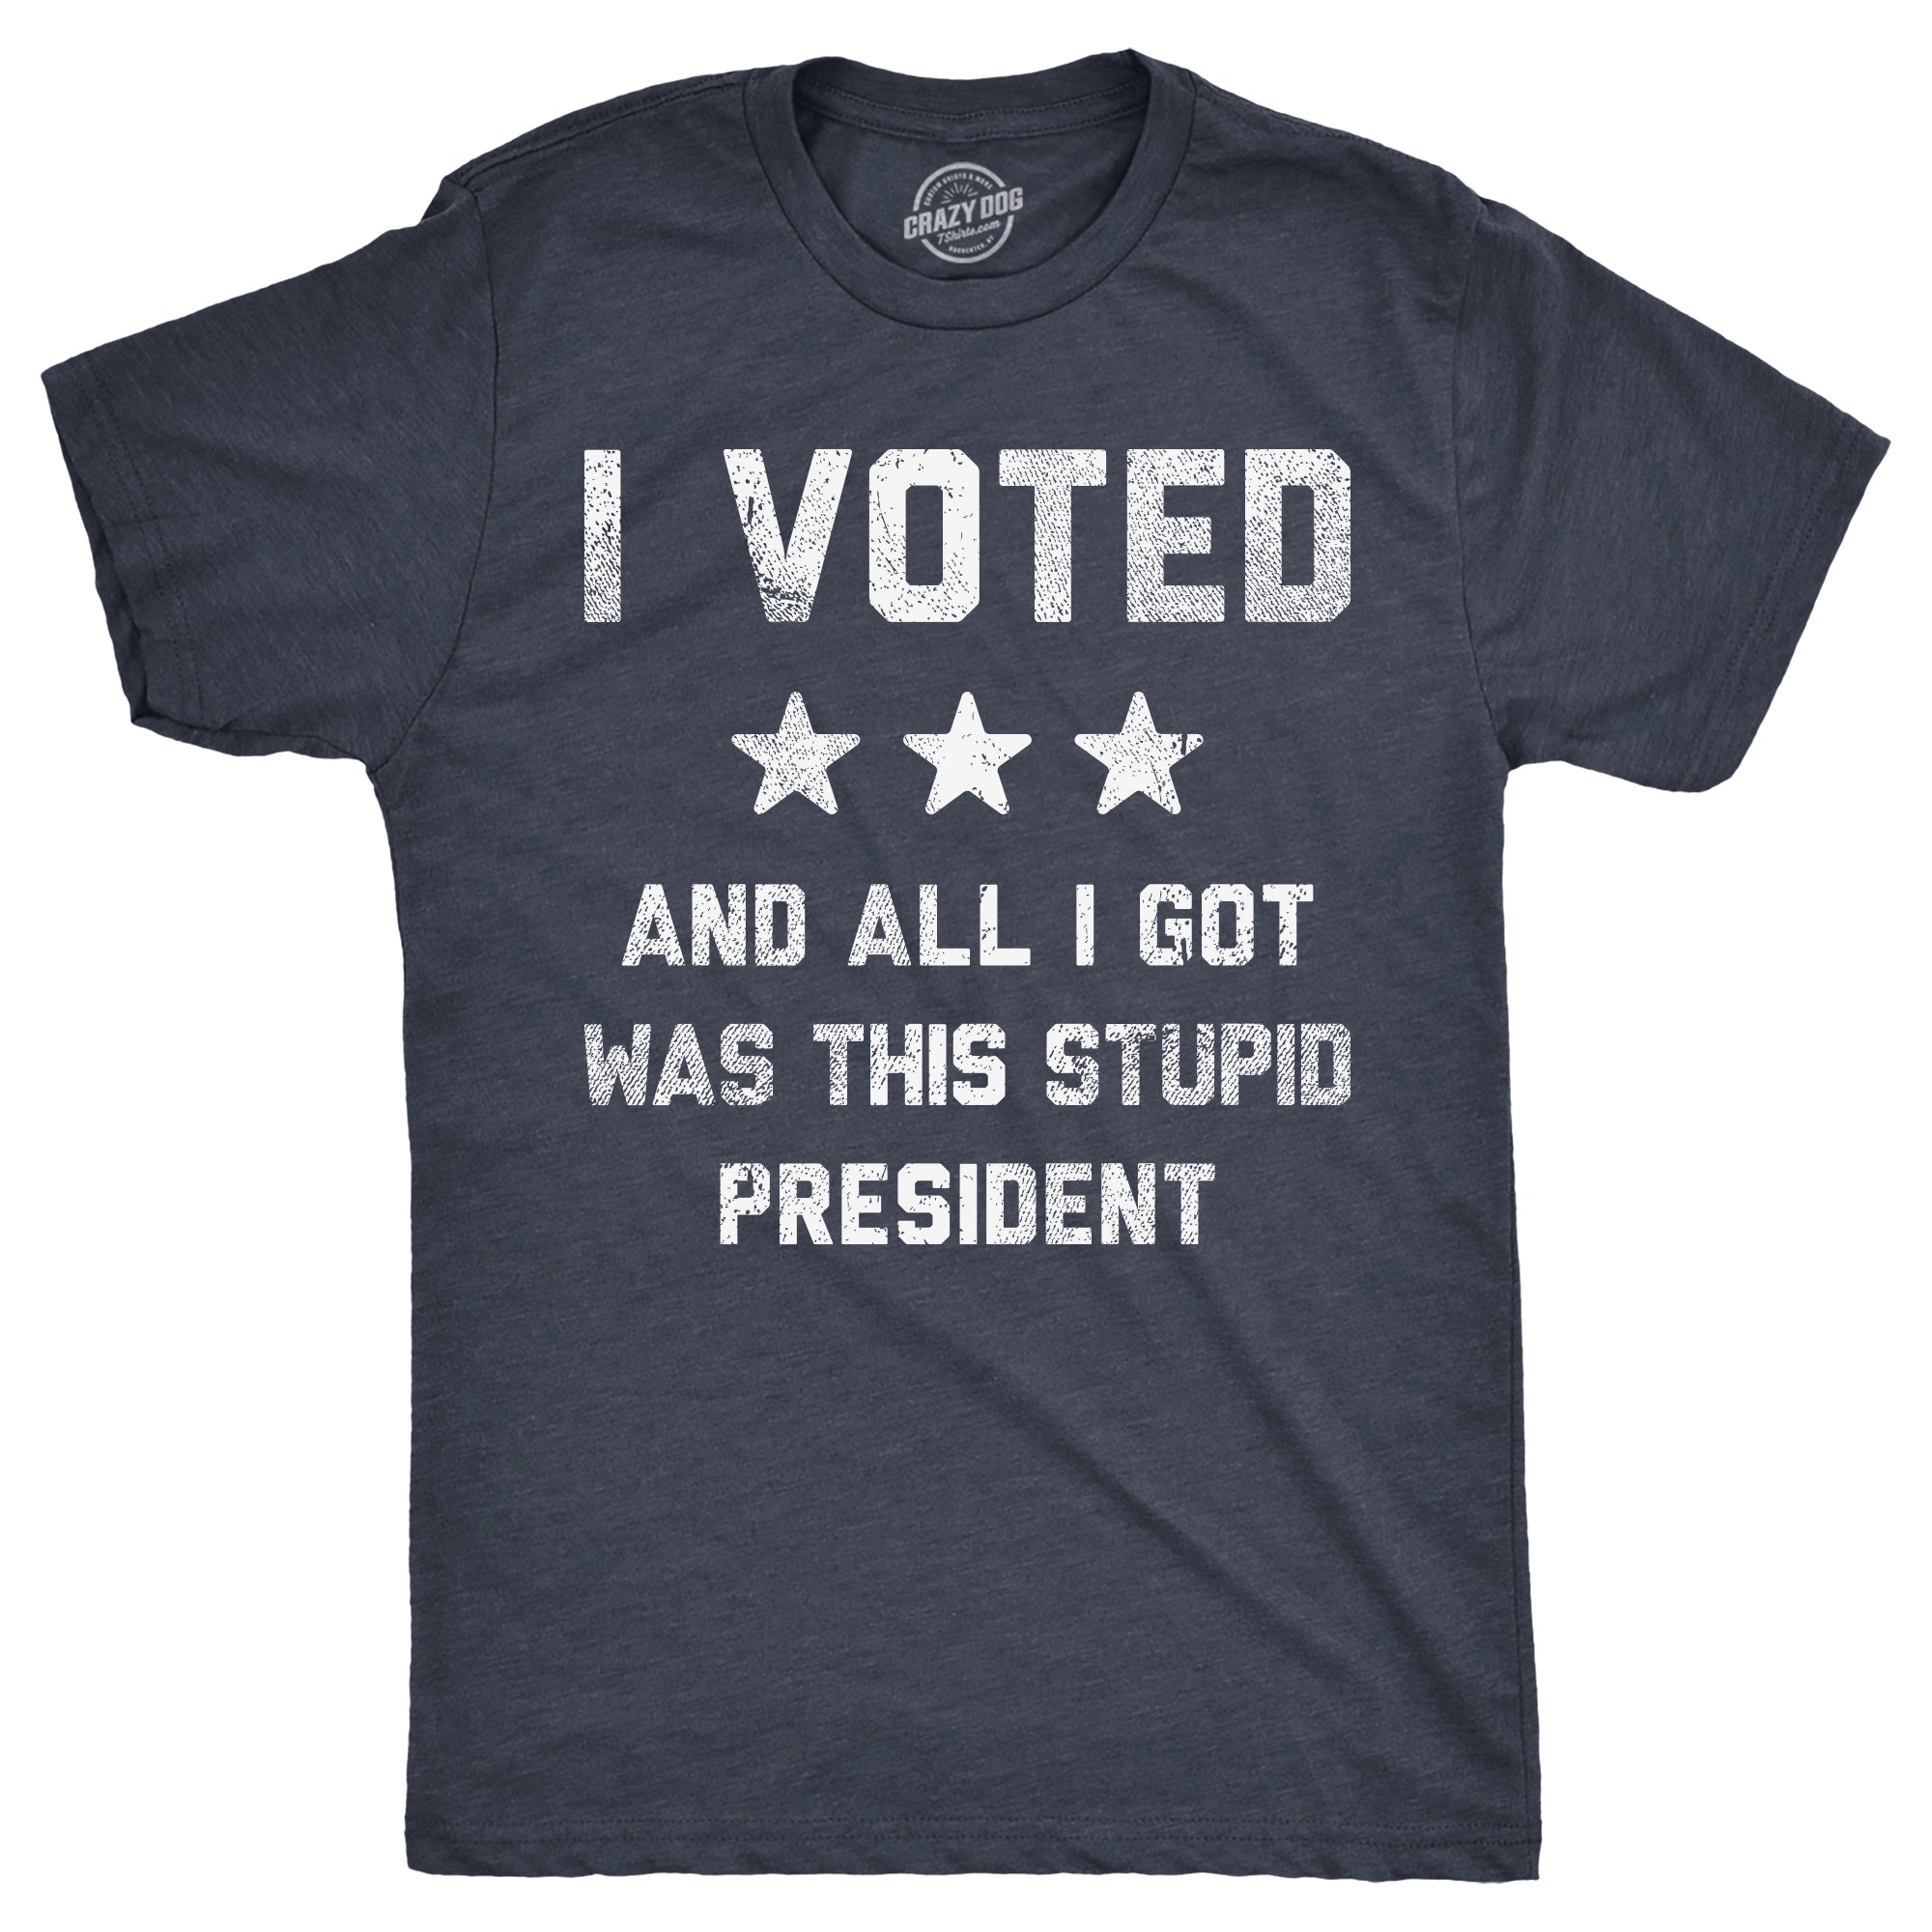 Funny Heather Navy - Voted Stupid President I Voted And All I Got Was This Stupid President Mens T Shirt Nerdy Political sarcastic Tee